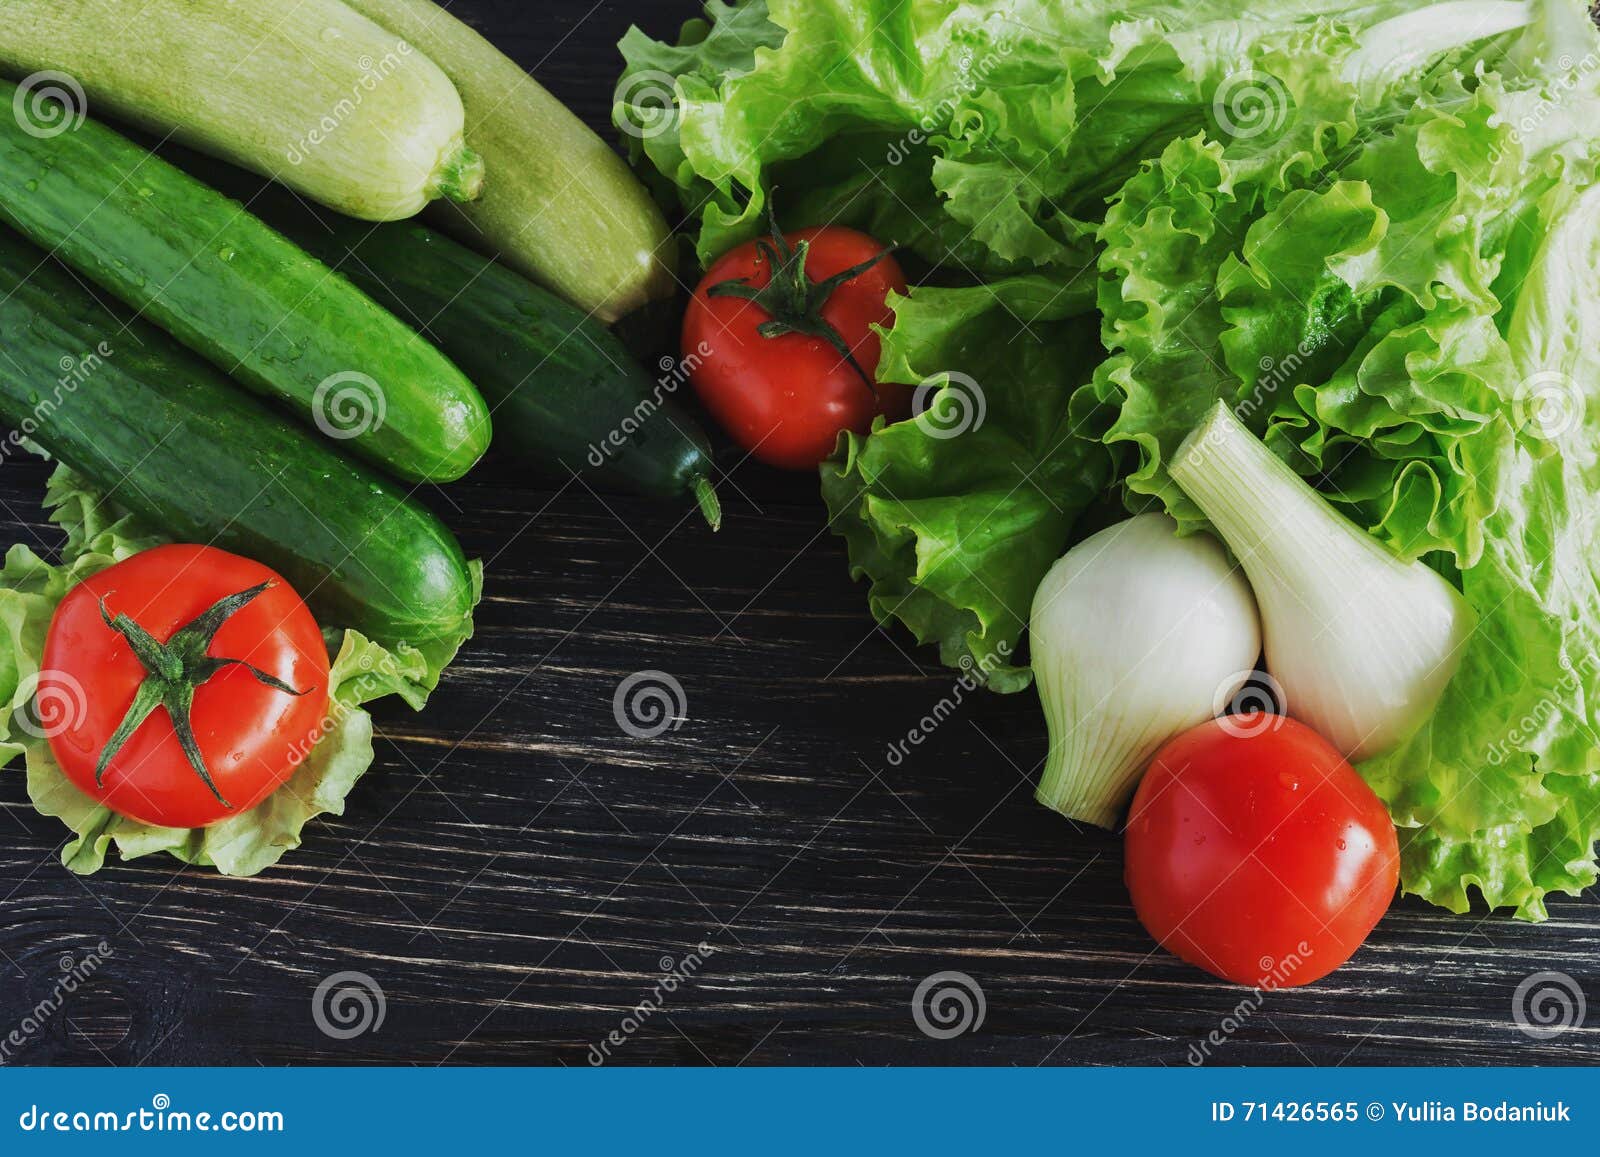 Green salad, tomatoes, cucumbers, zucchini, squash, and onion on black rustic wooden background . Group of fresh vegetables